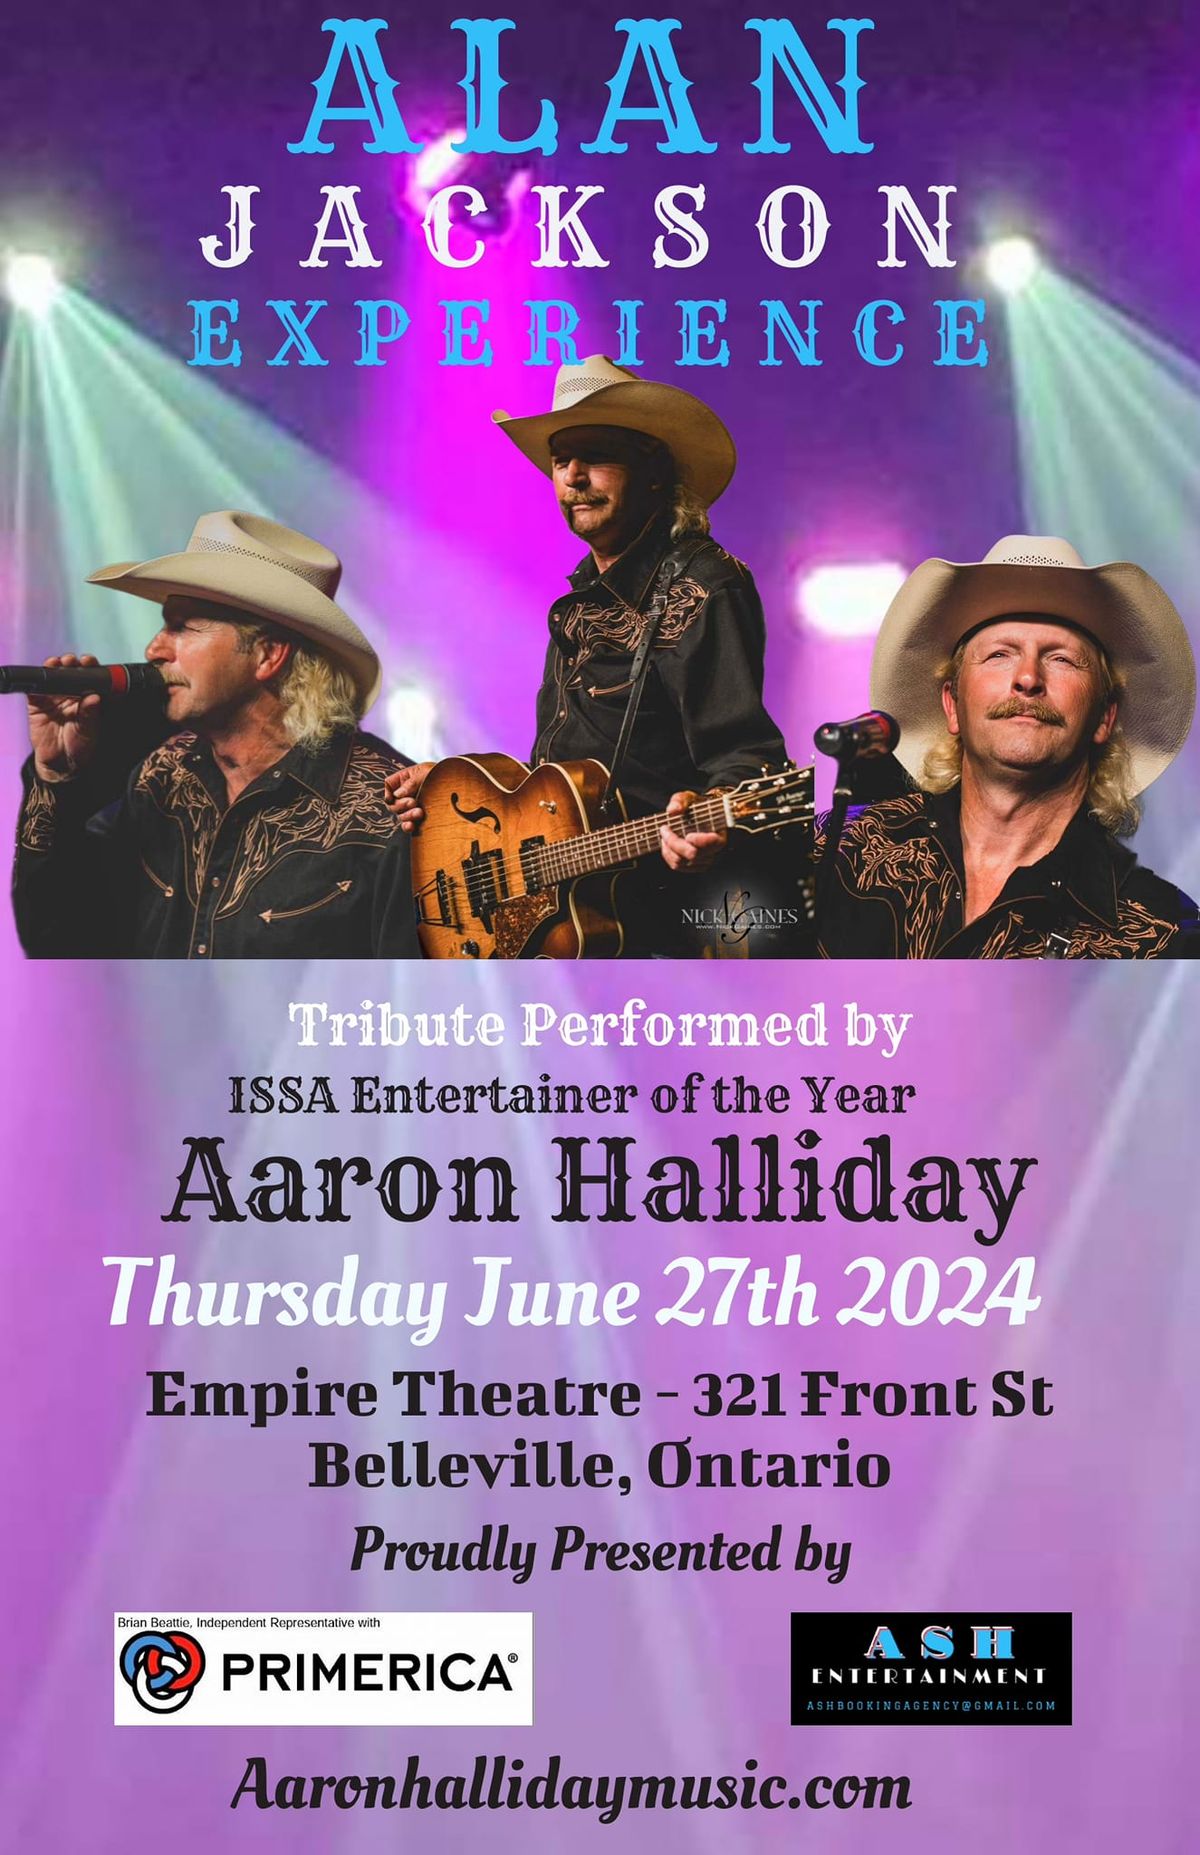 The Alan Jackson Experience Tribute  Too Much Of A Good  Brian & Rene Beatie of Primerica Present